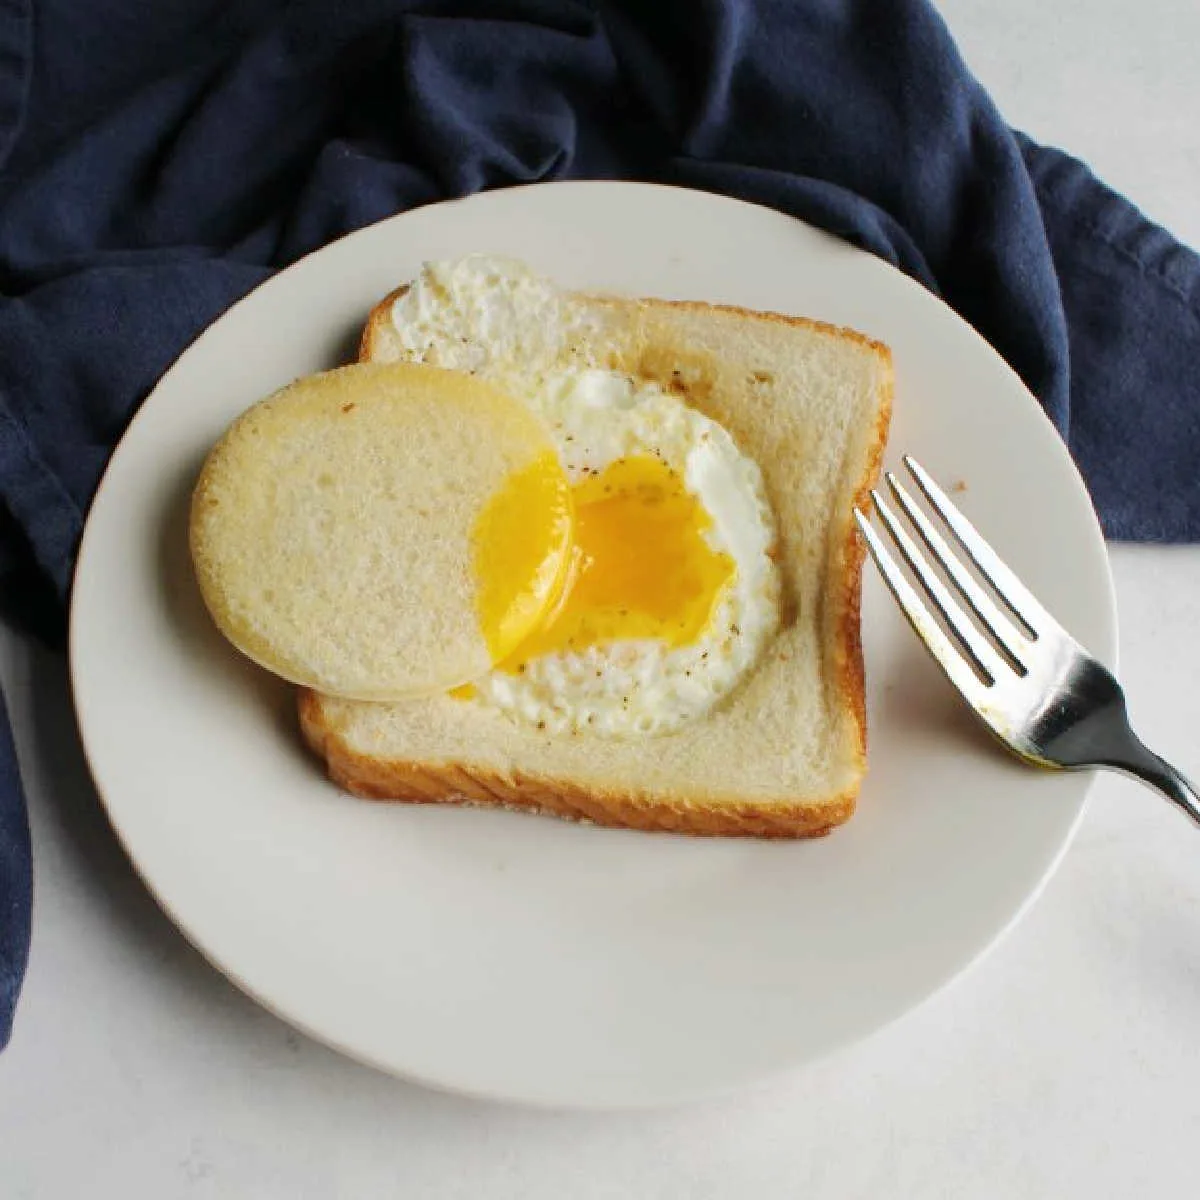 egg in a hole on plate with bread circle dipped in runny yolk.